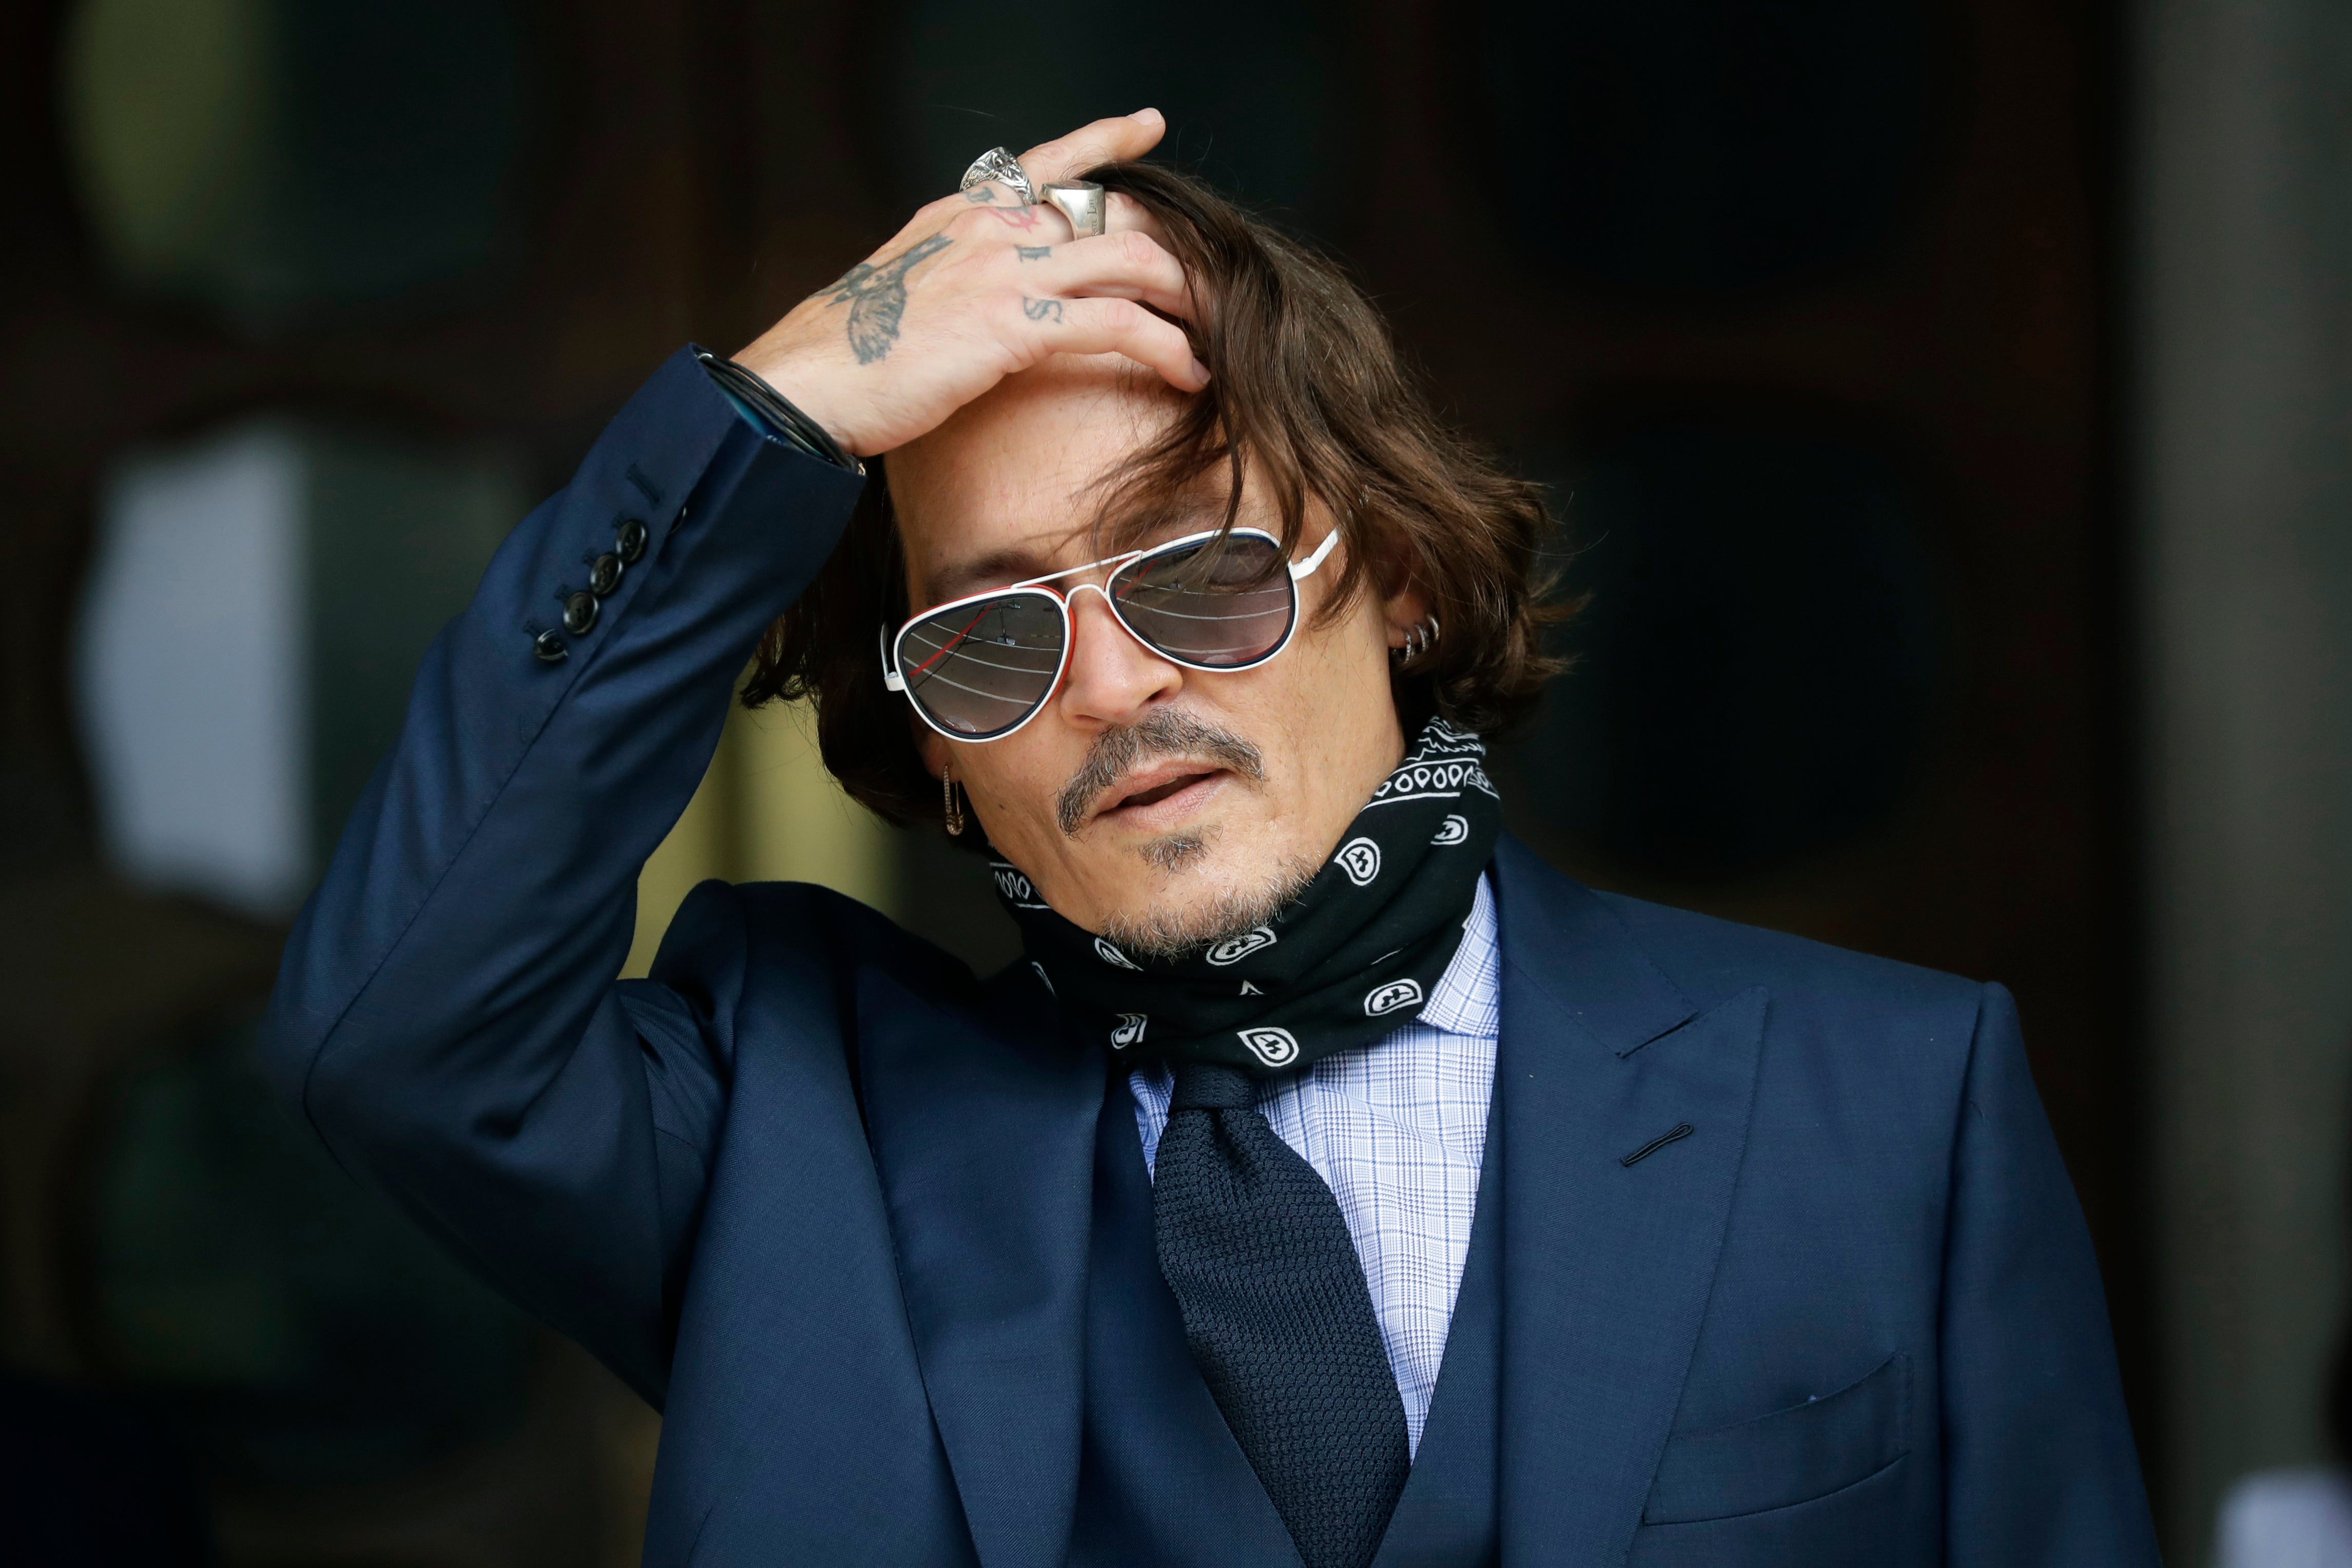 Johnny Depp lost his libel case against The Sun newspaper